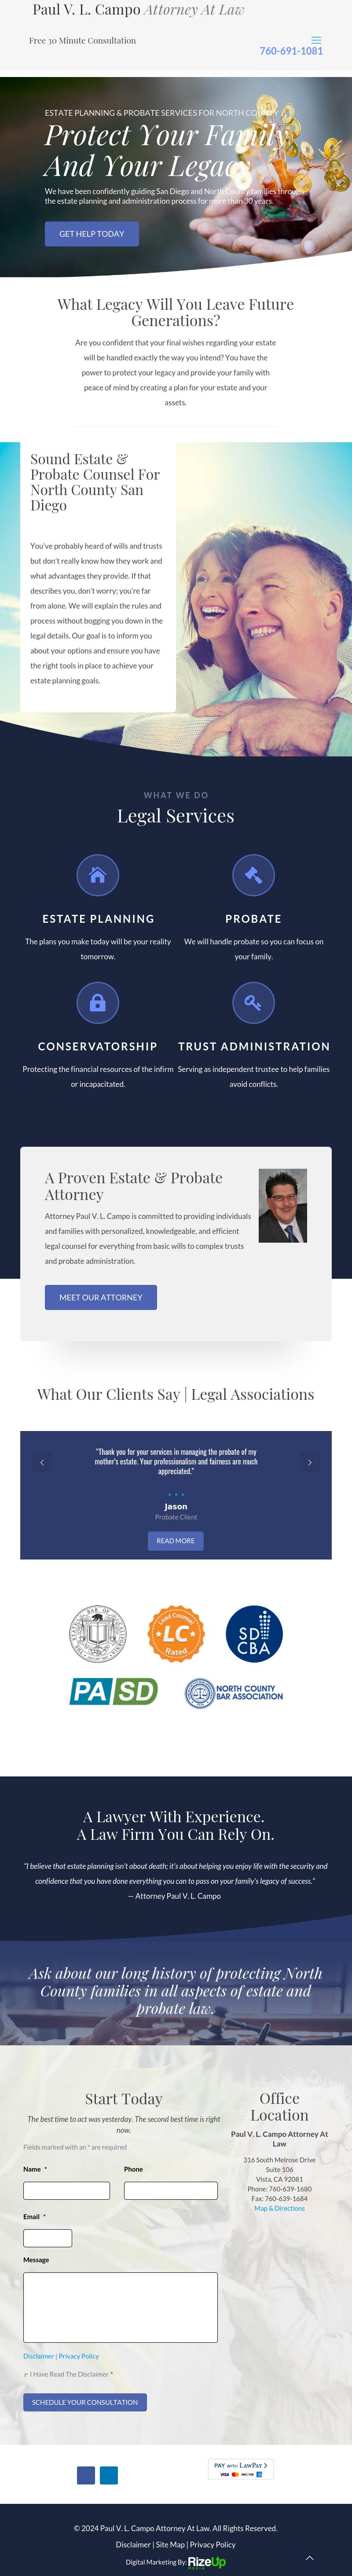 Paul V. L. Campo Attorney At Law - Vista CA Lawyers